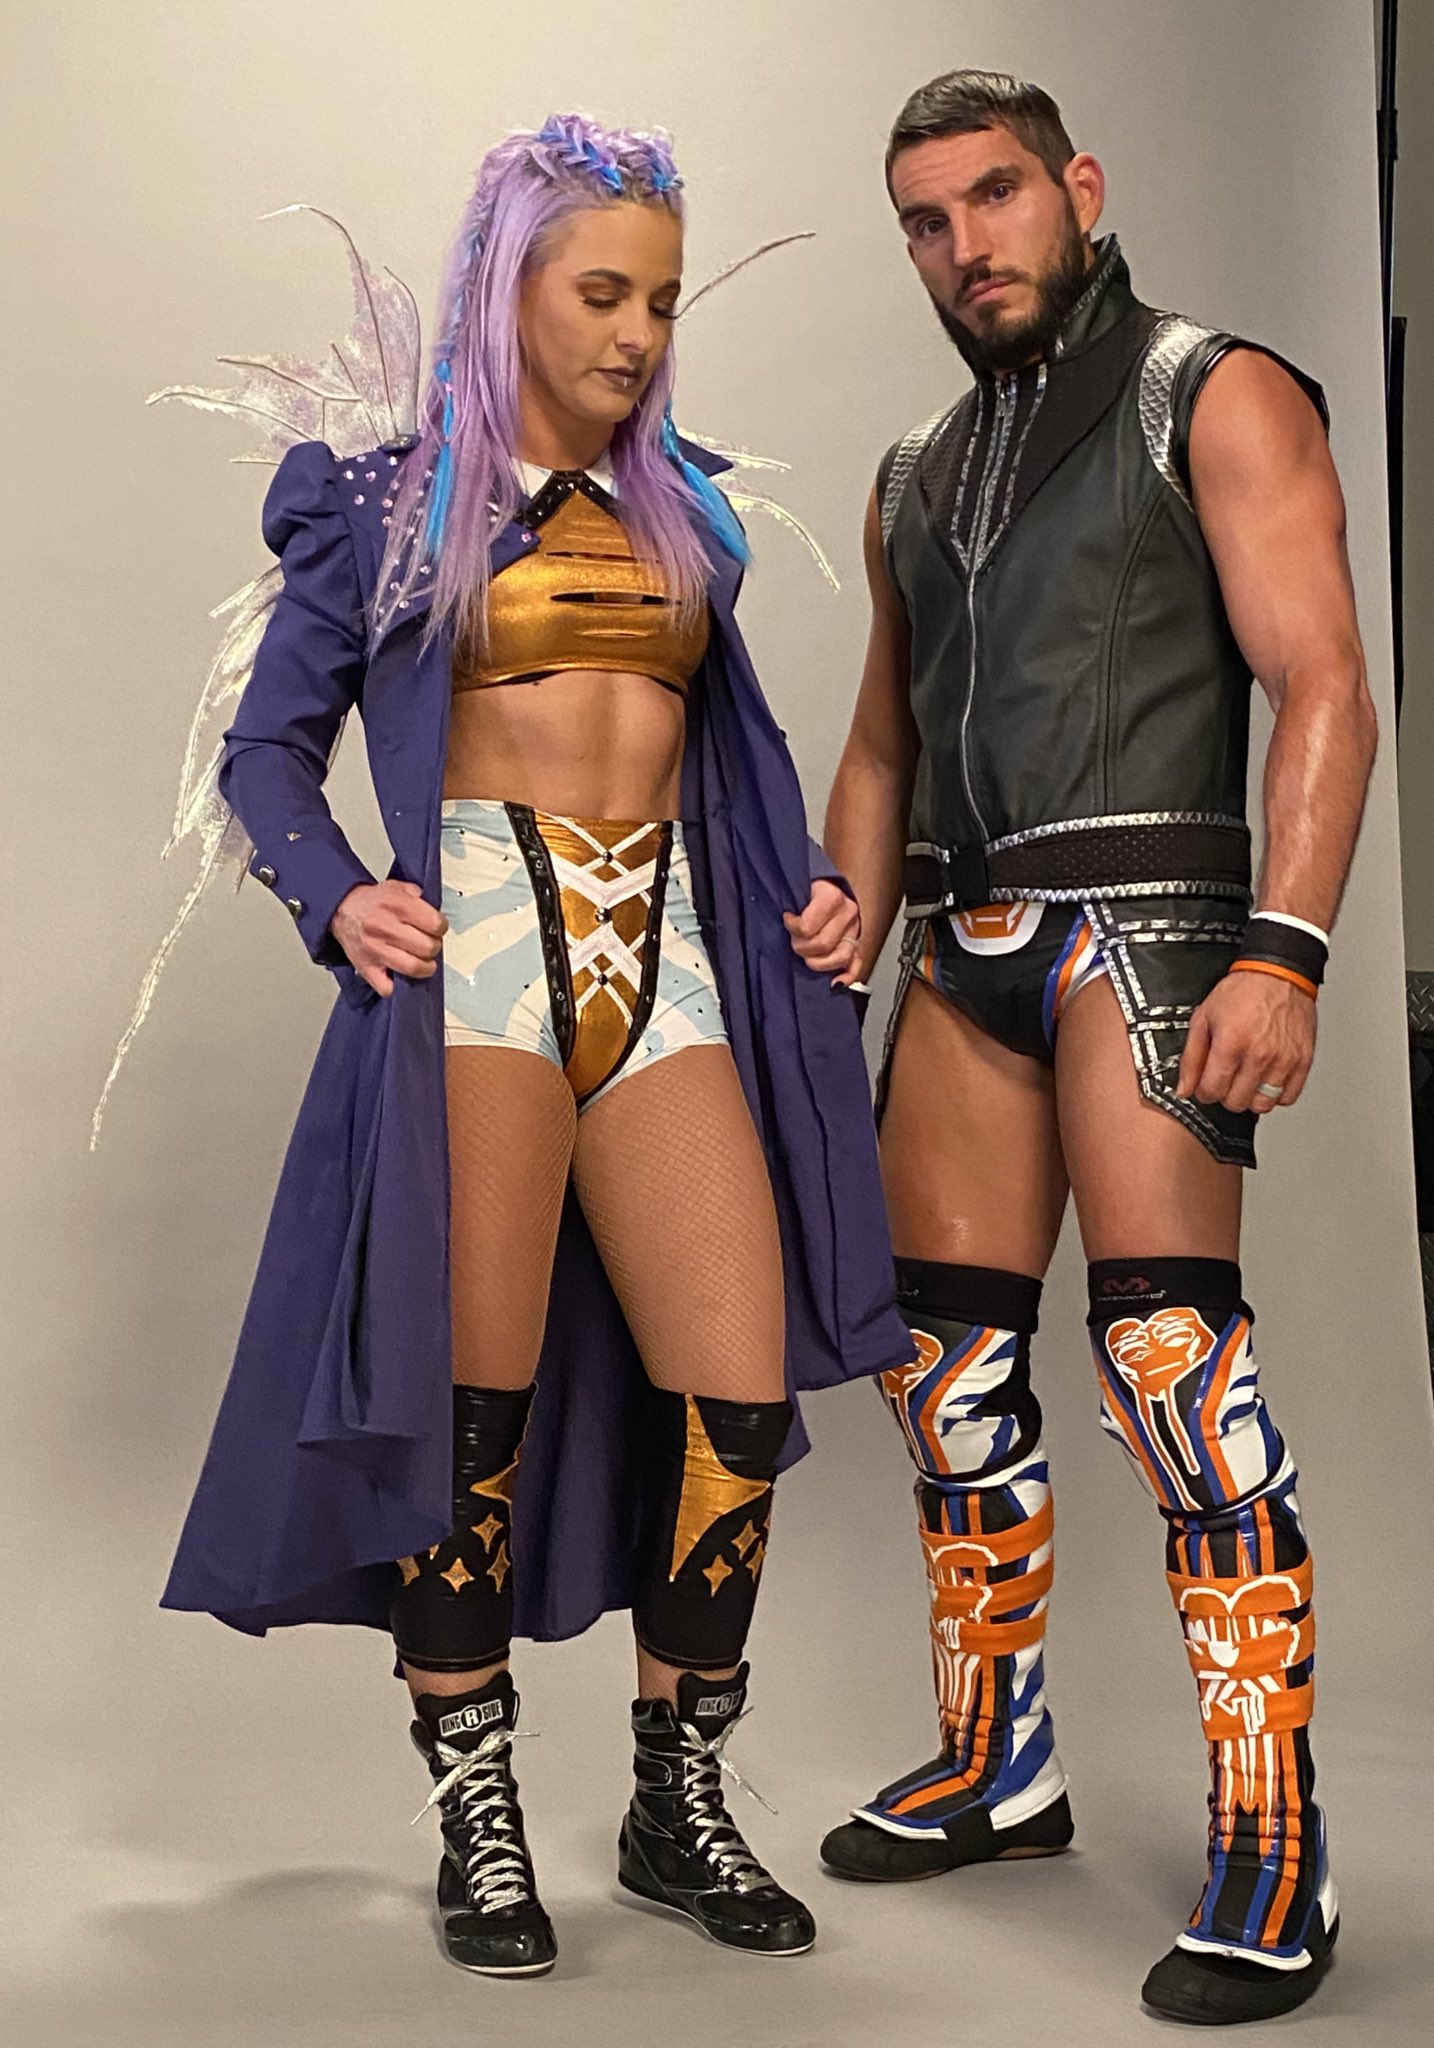 Johnny Gargano and Candice LeRae are married to each other WWE.